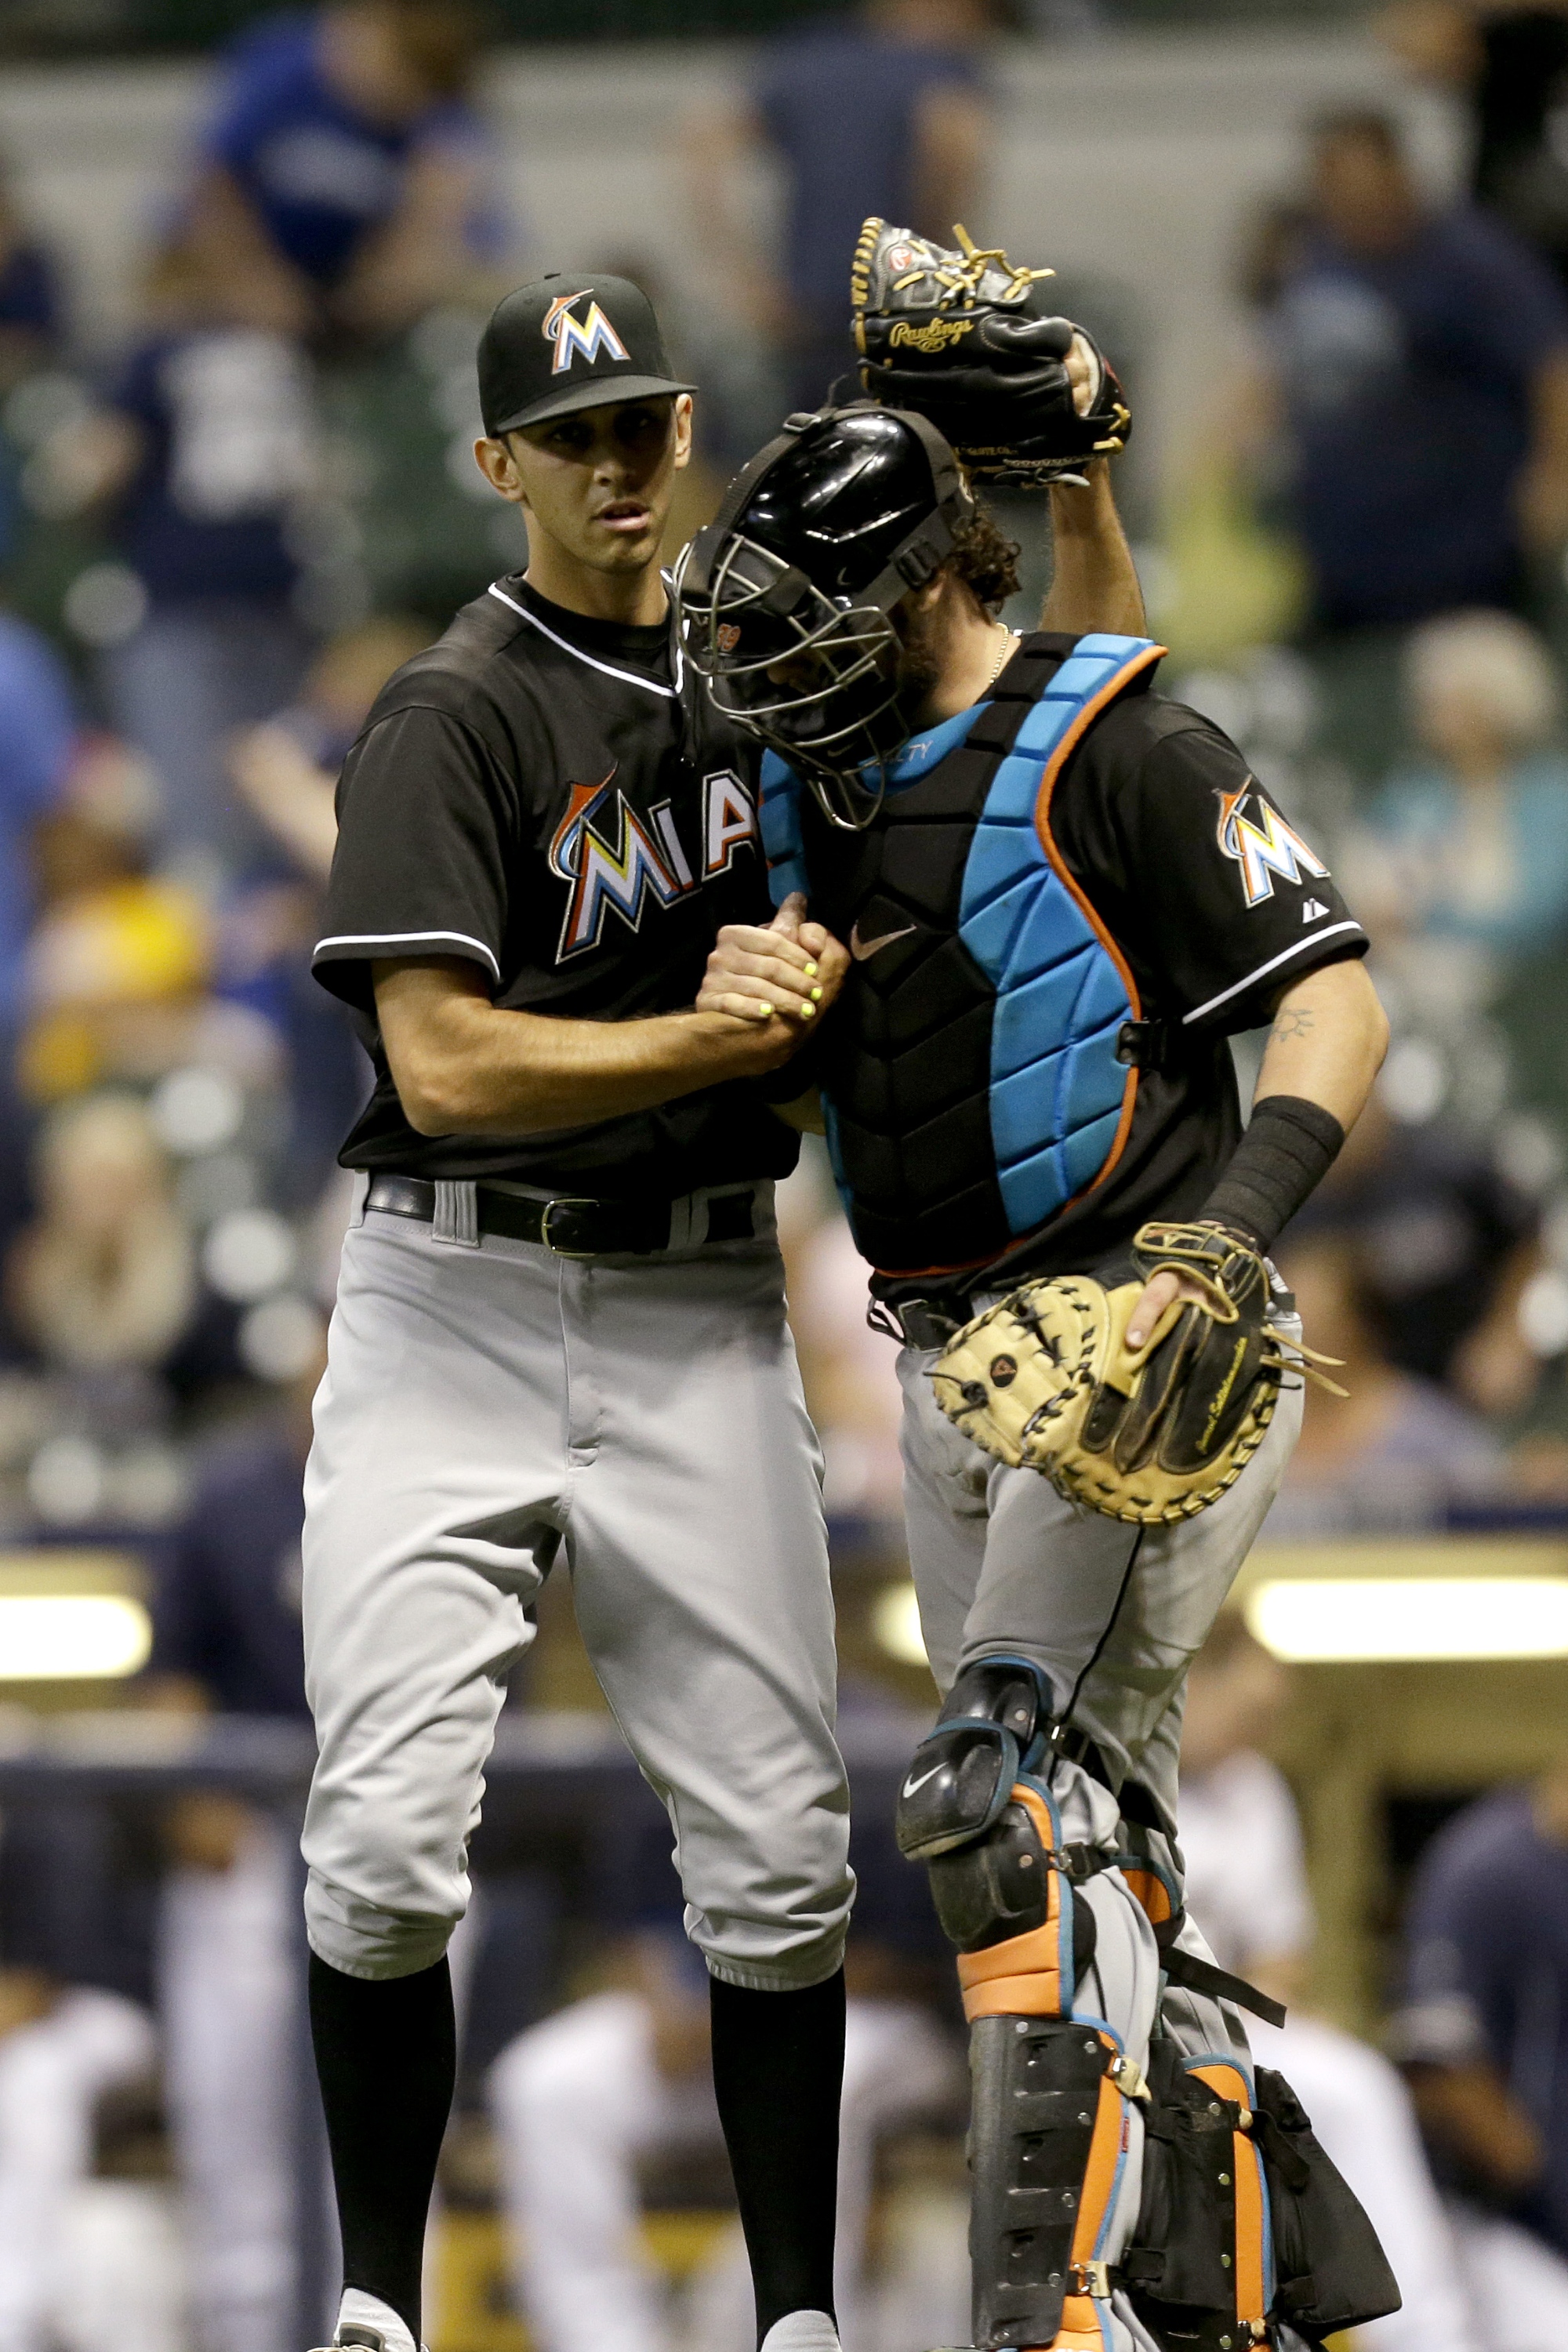 Marlins pitcher Steve Cishek is one of the relievers who works out with Eric Cressey.(Getty Images)